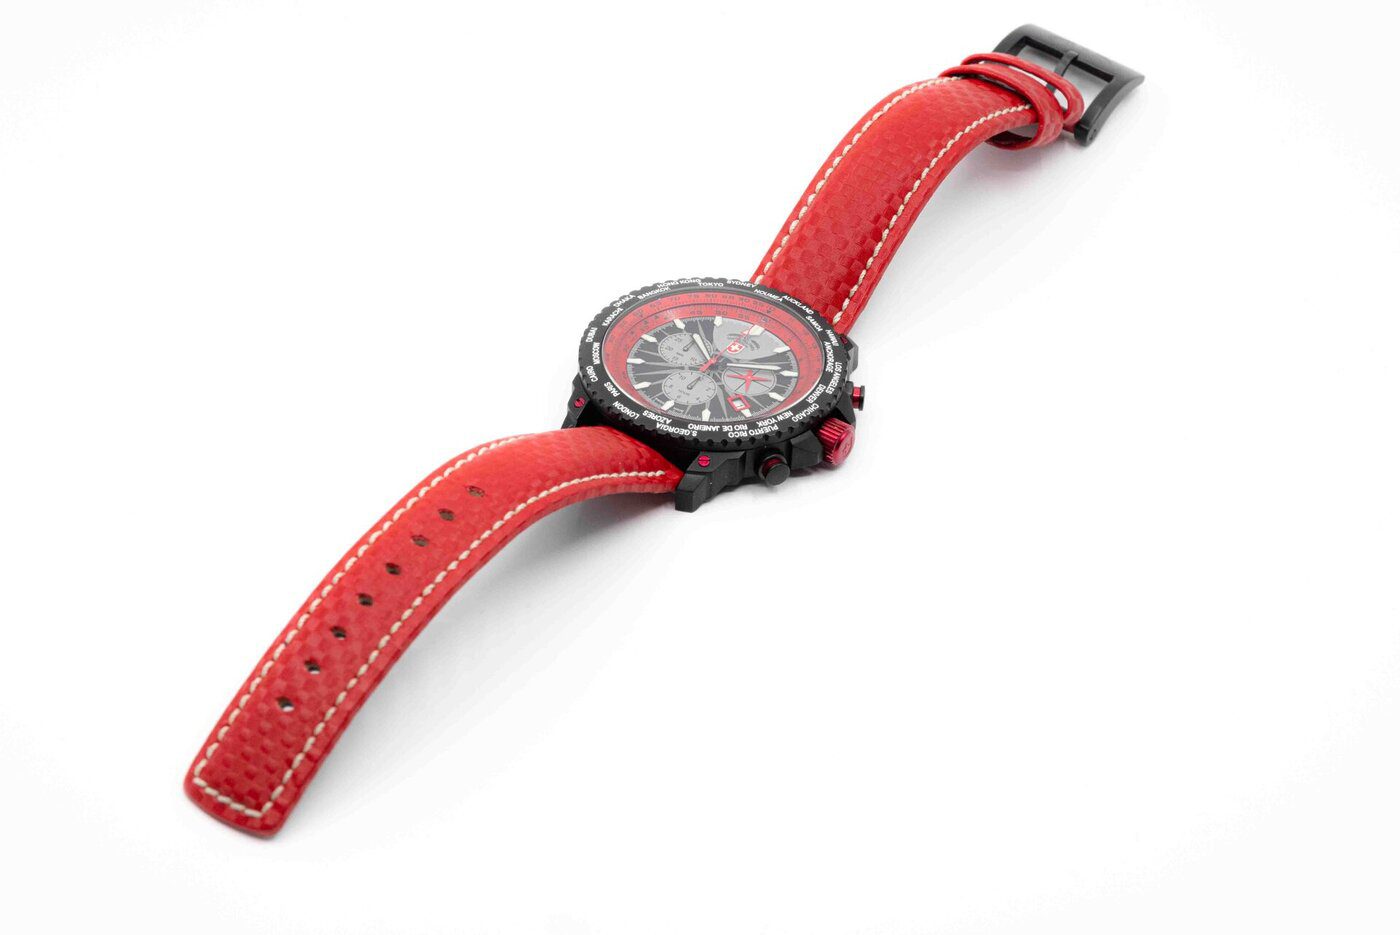 Professional product photo of a men's wristwatch by Seb Duper